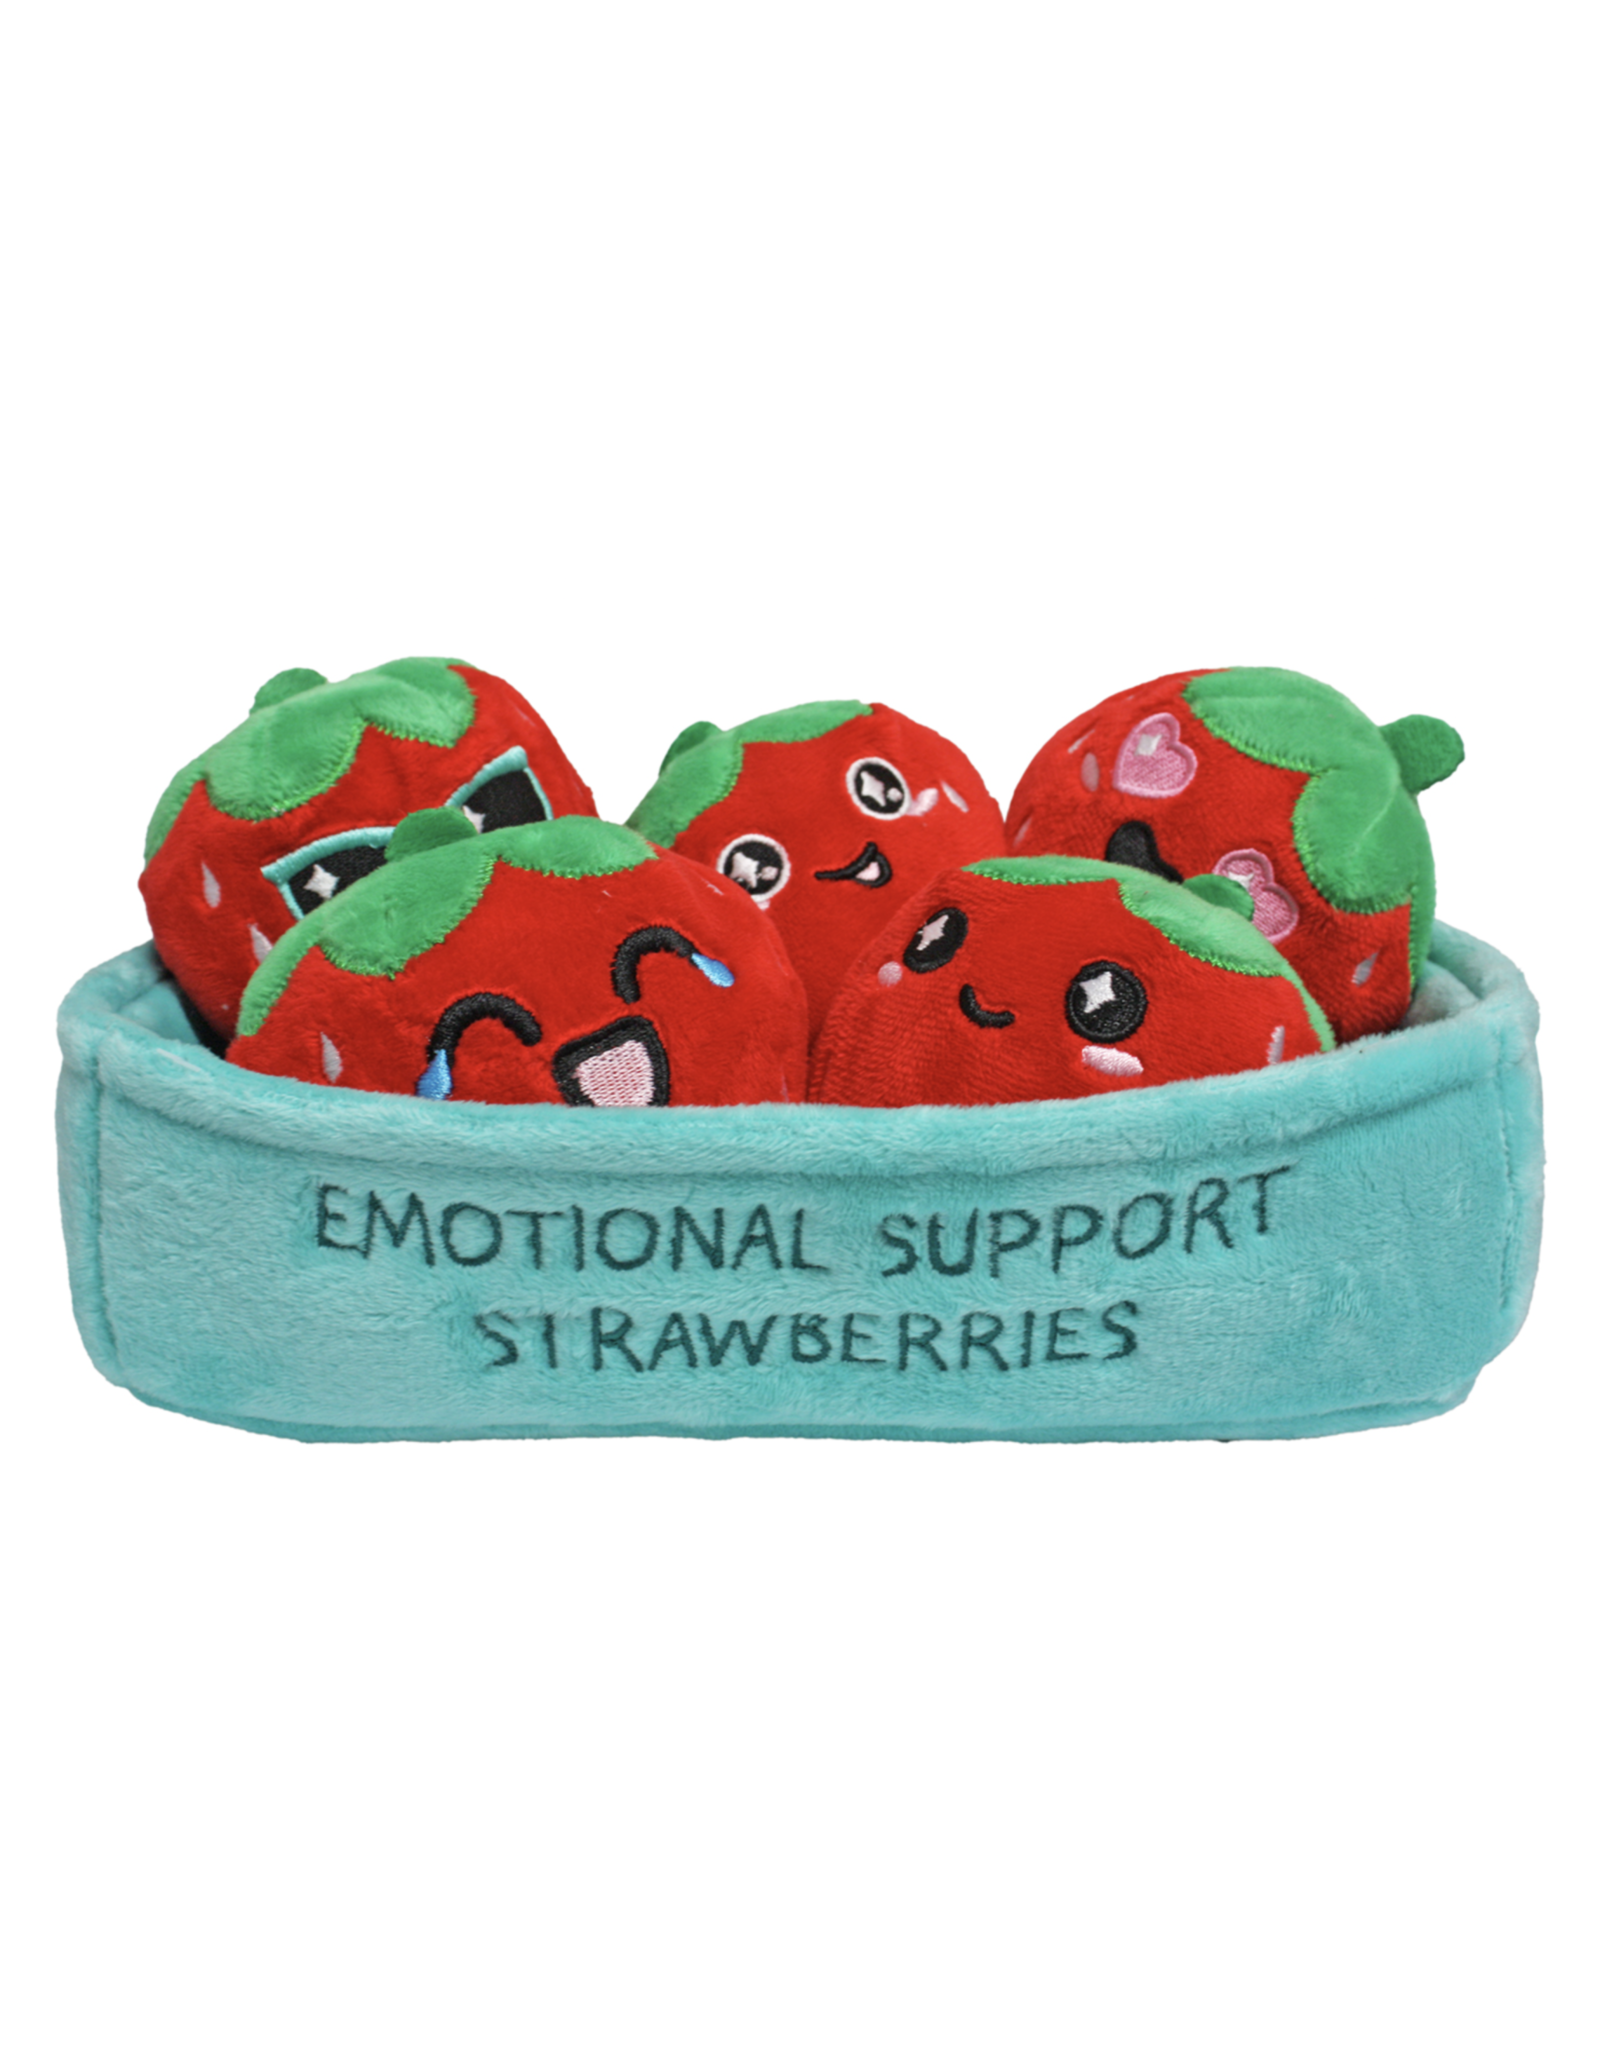 What Do You Meme Emotional Support Strawberries